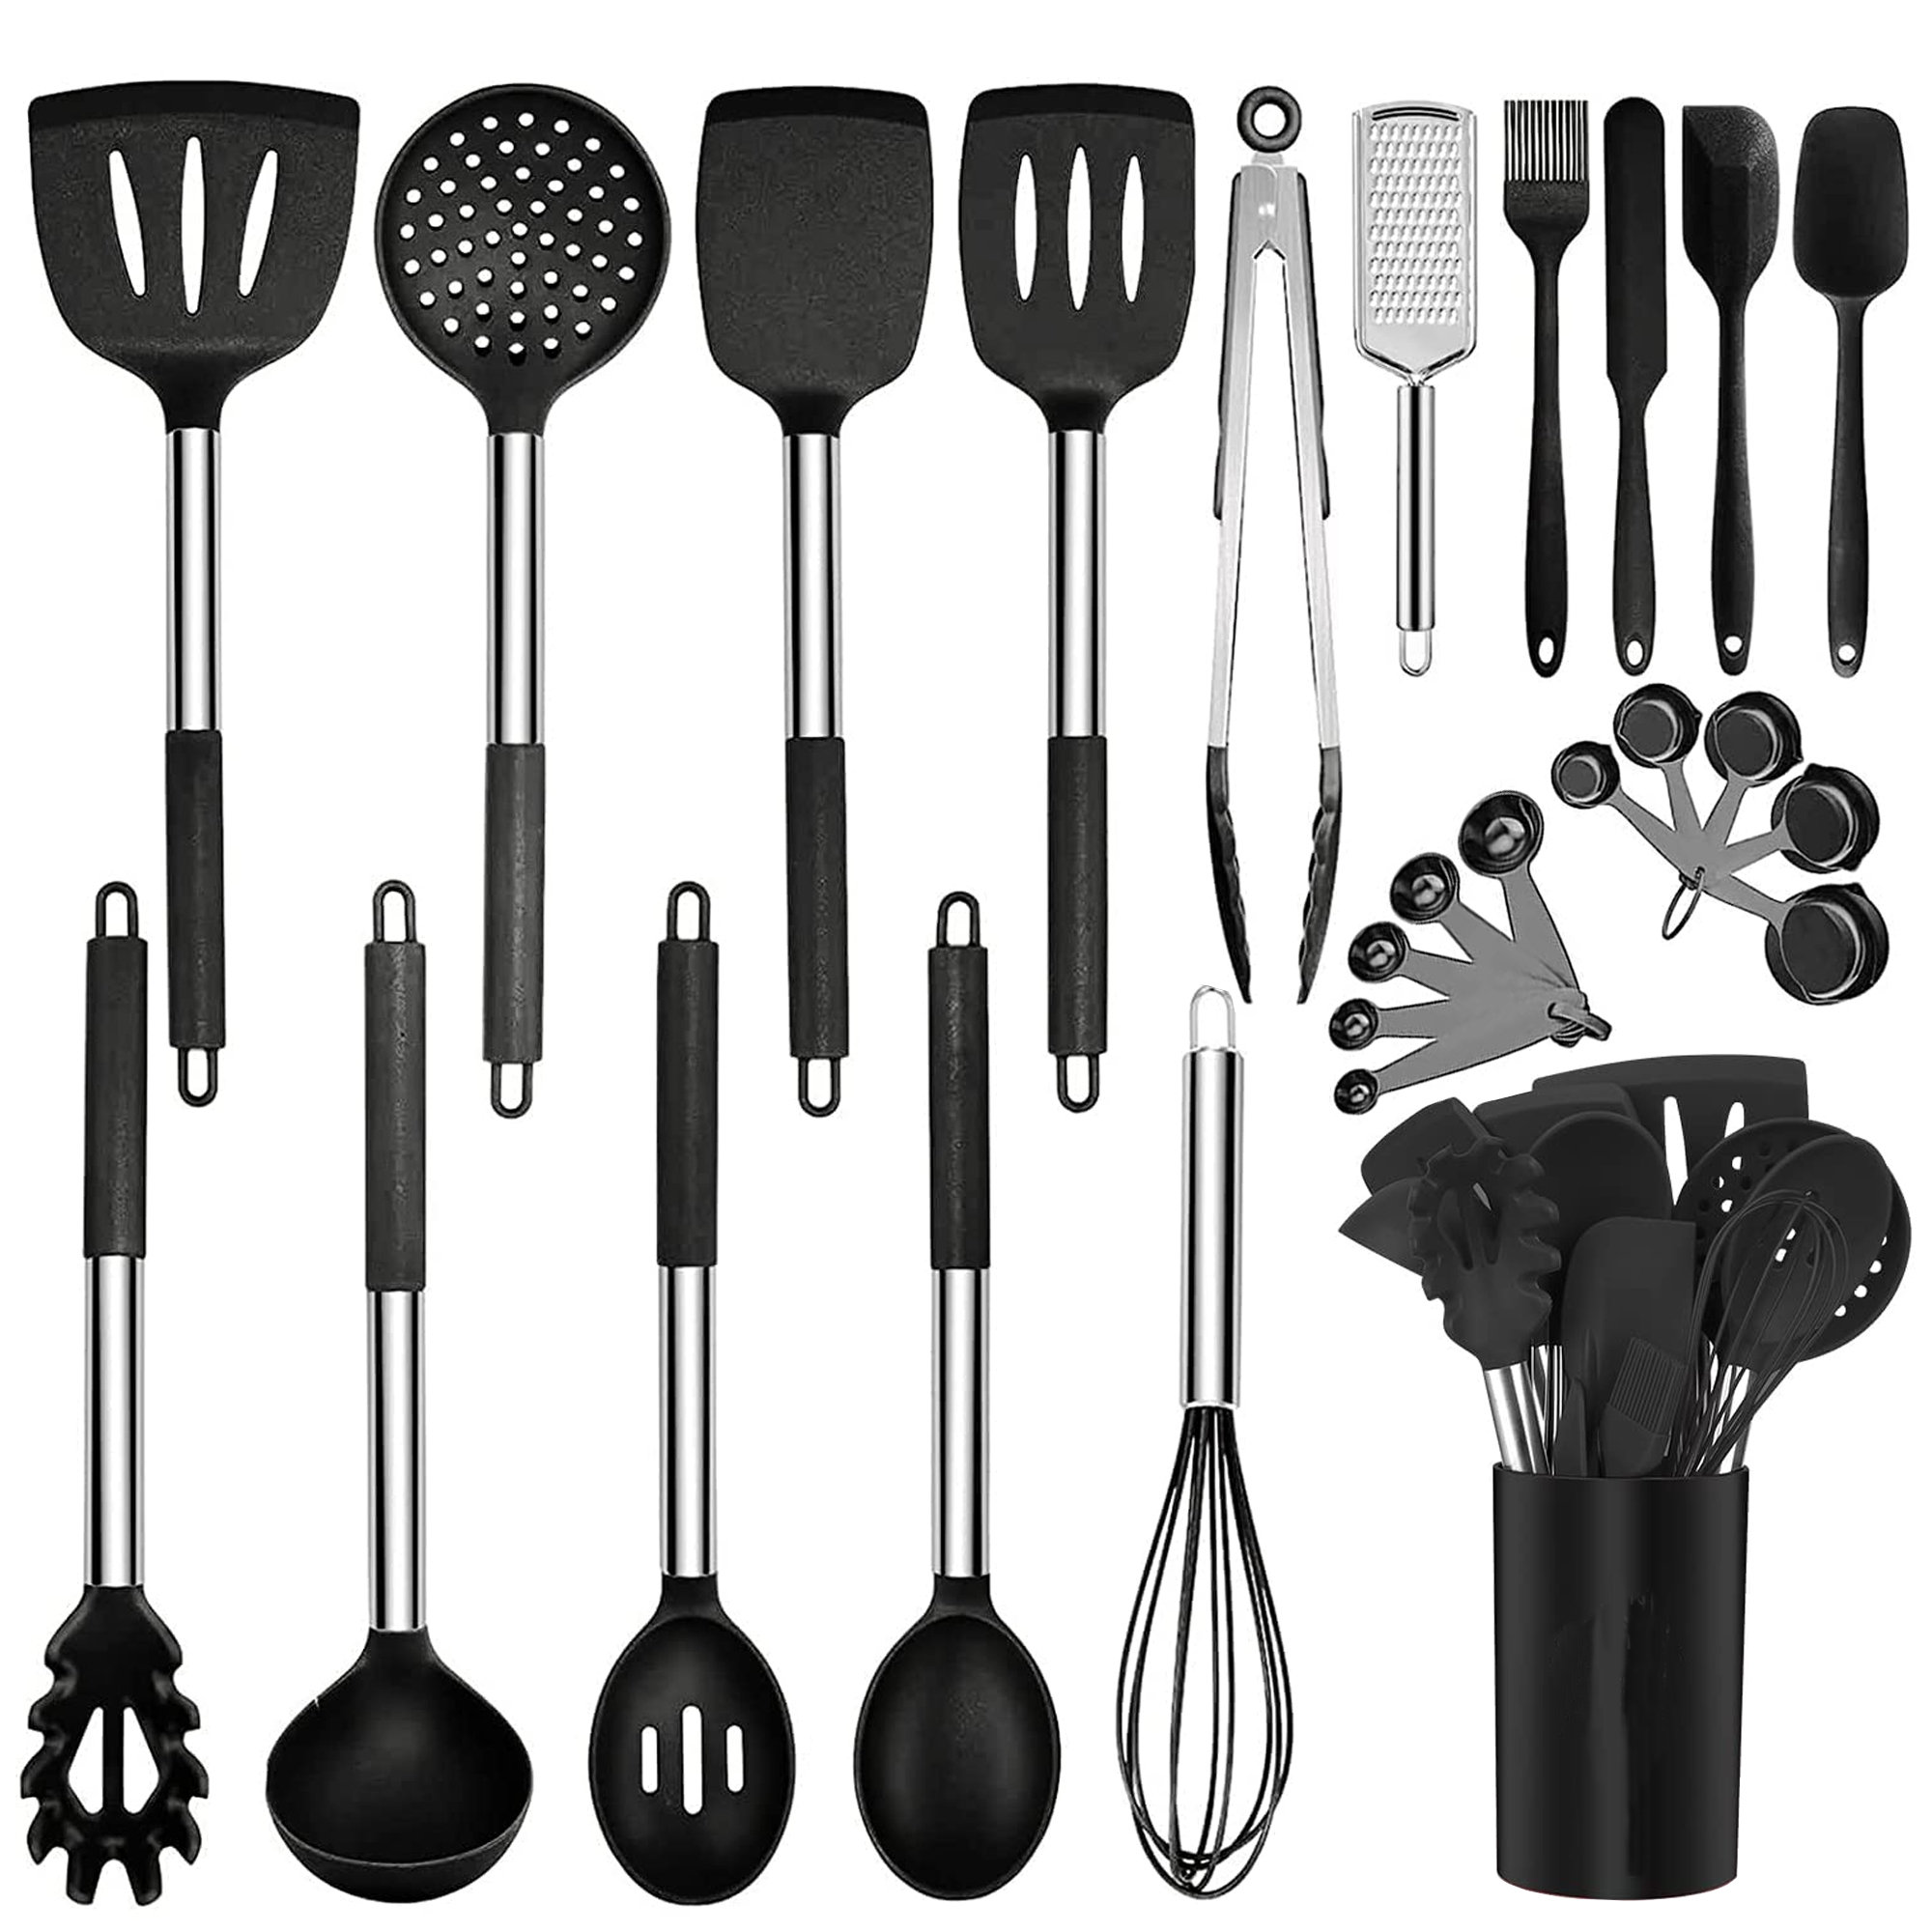 MegaChef Gray Silicone and Stainless Steel Cooking Utensils (Set